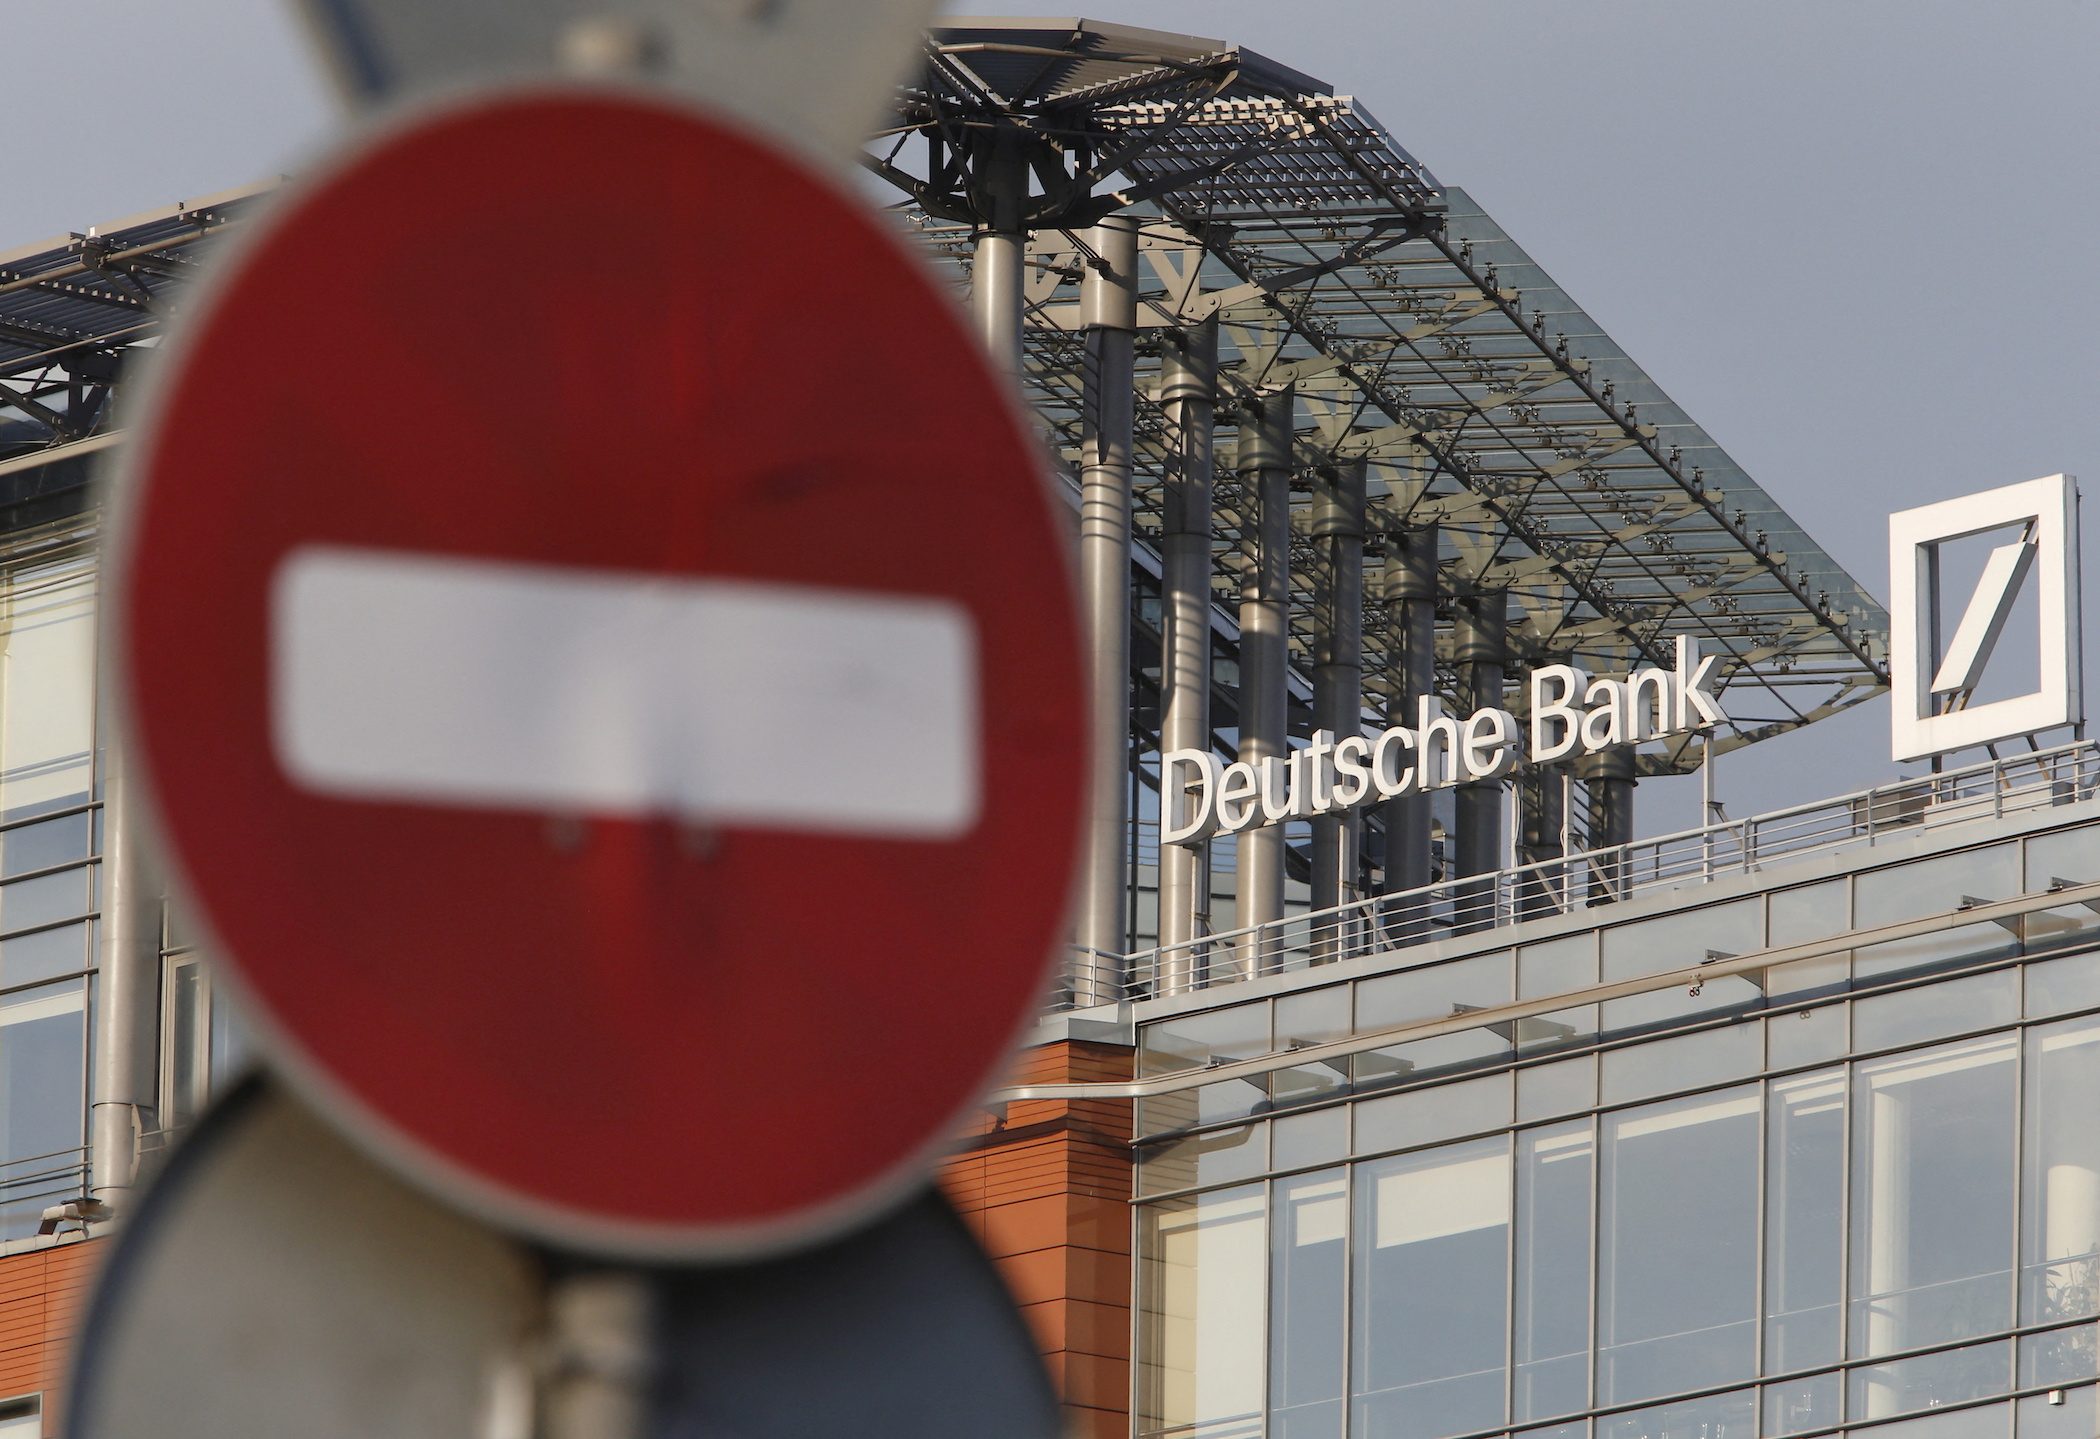 Deutsche Bank to wind down in Russia, reversing course after backlash